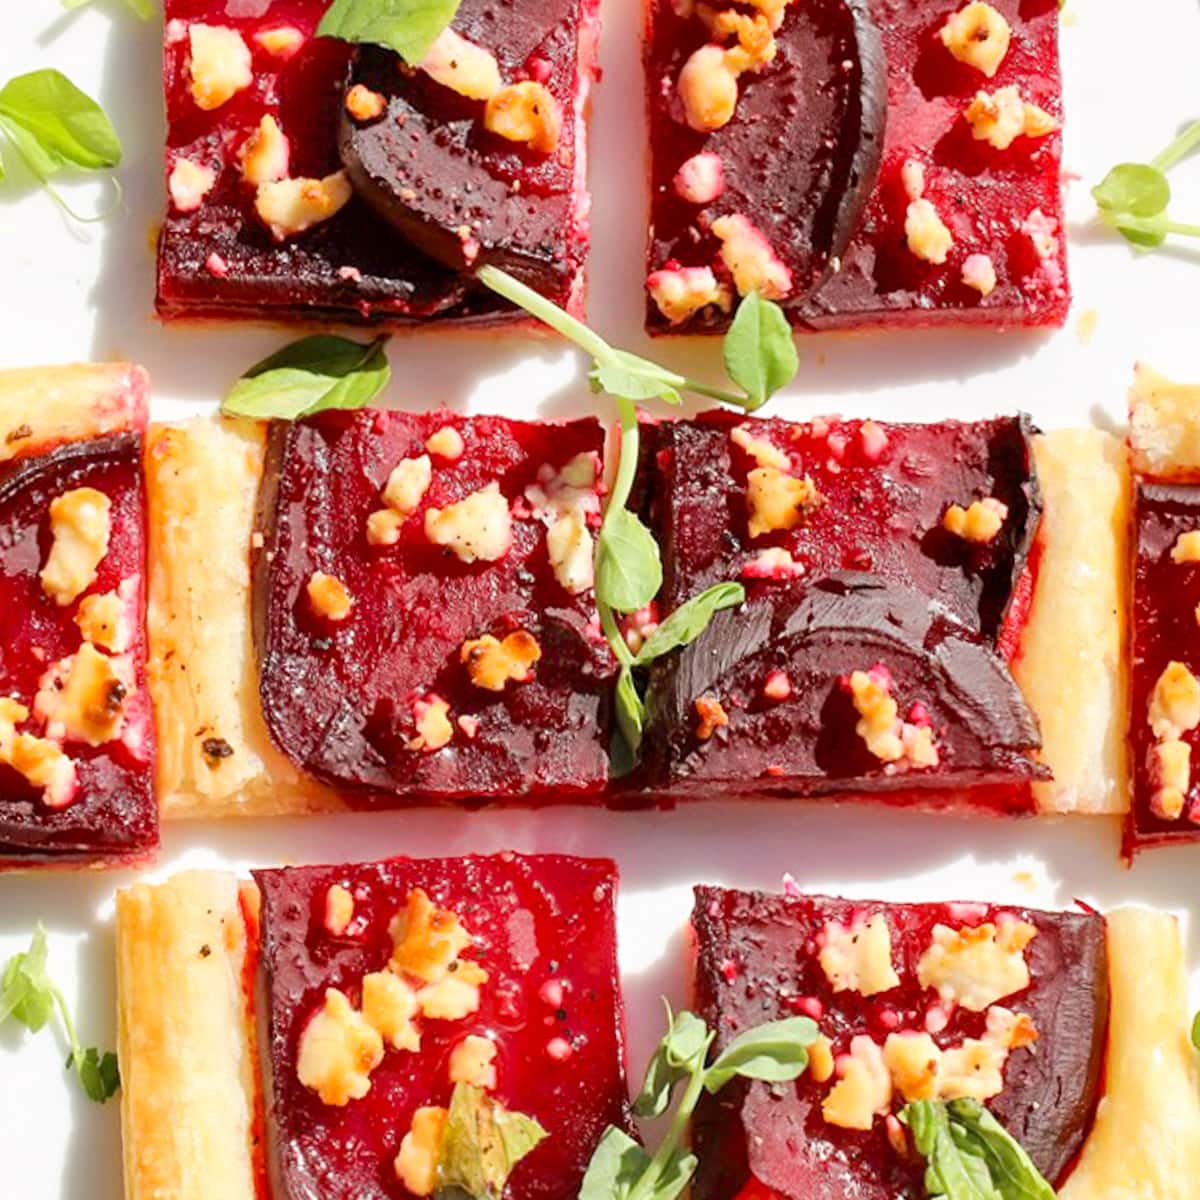 Beet Appetizer With Goat Cheese on Puff Pastry